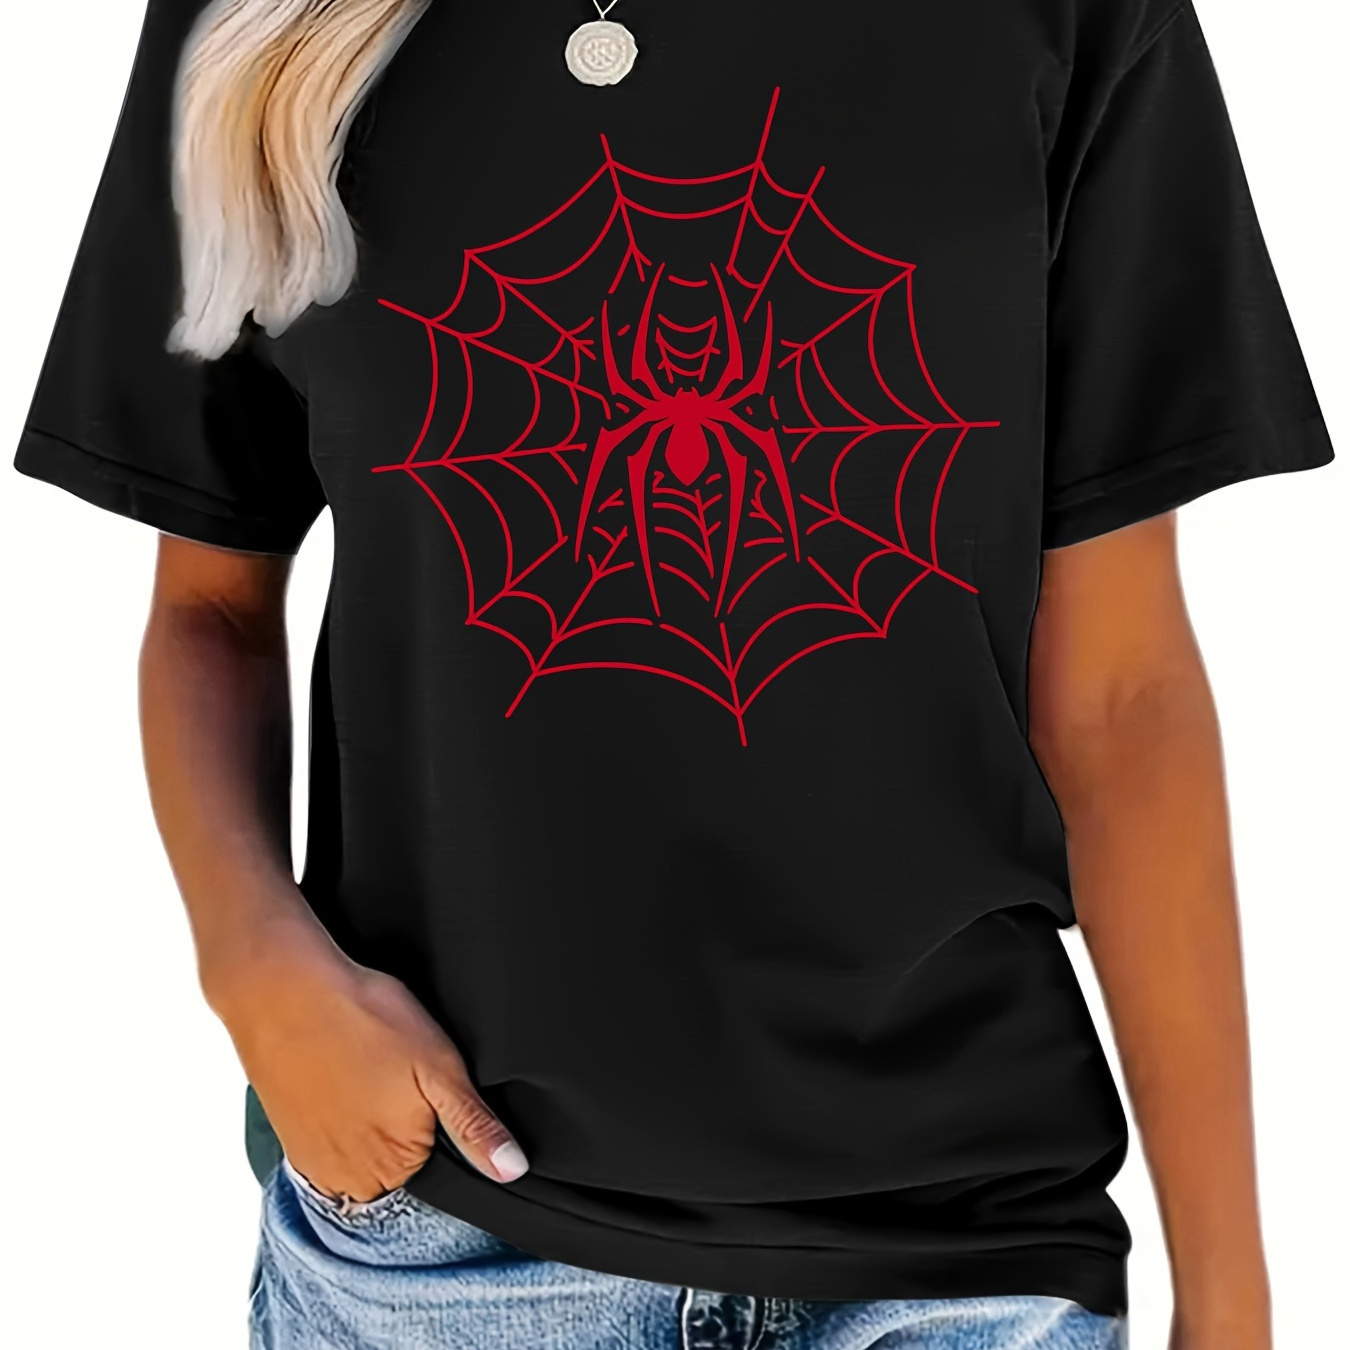 

Spider & Web Print Casual T-shirt, Round Neck Short Sleeves Stretchy Sports Tee, Halloween Women's Comfy Tops